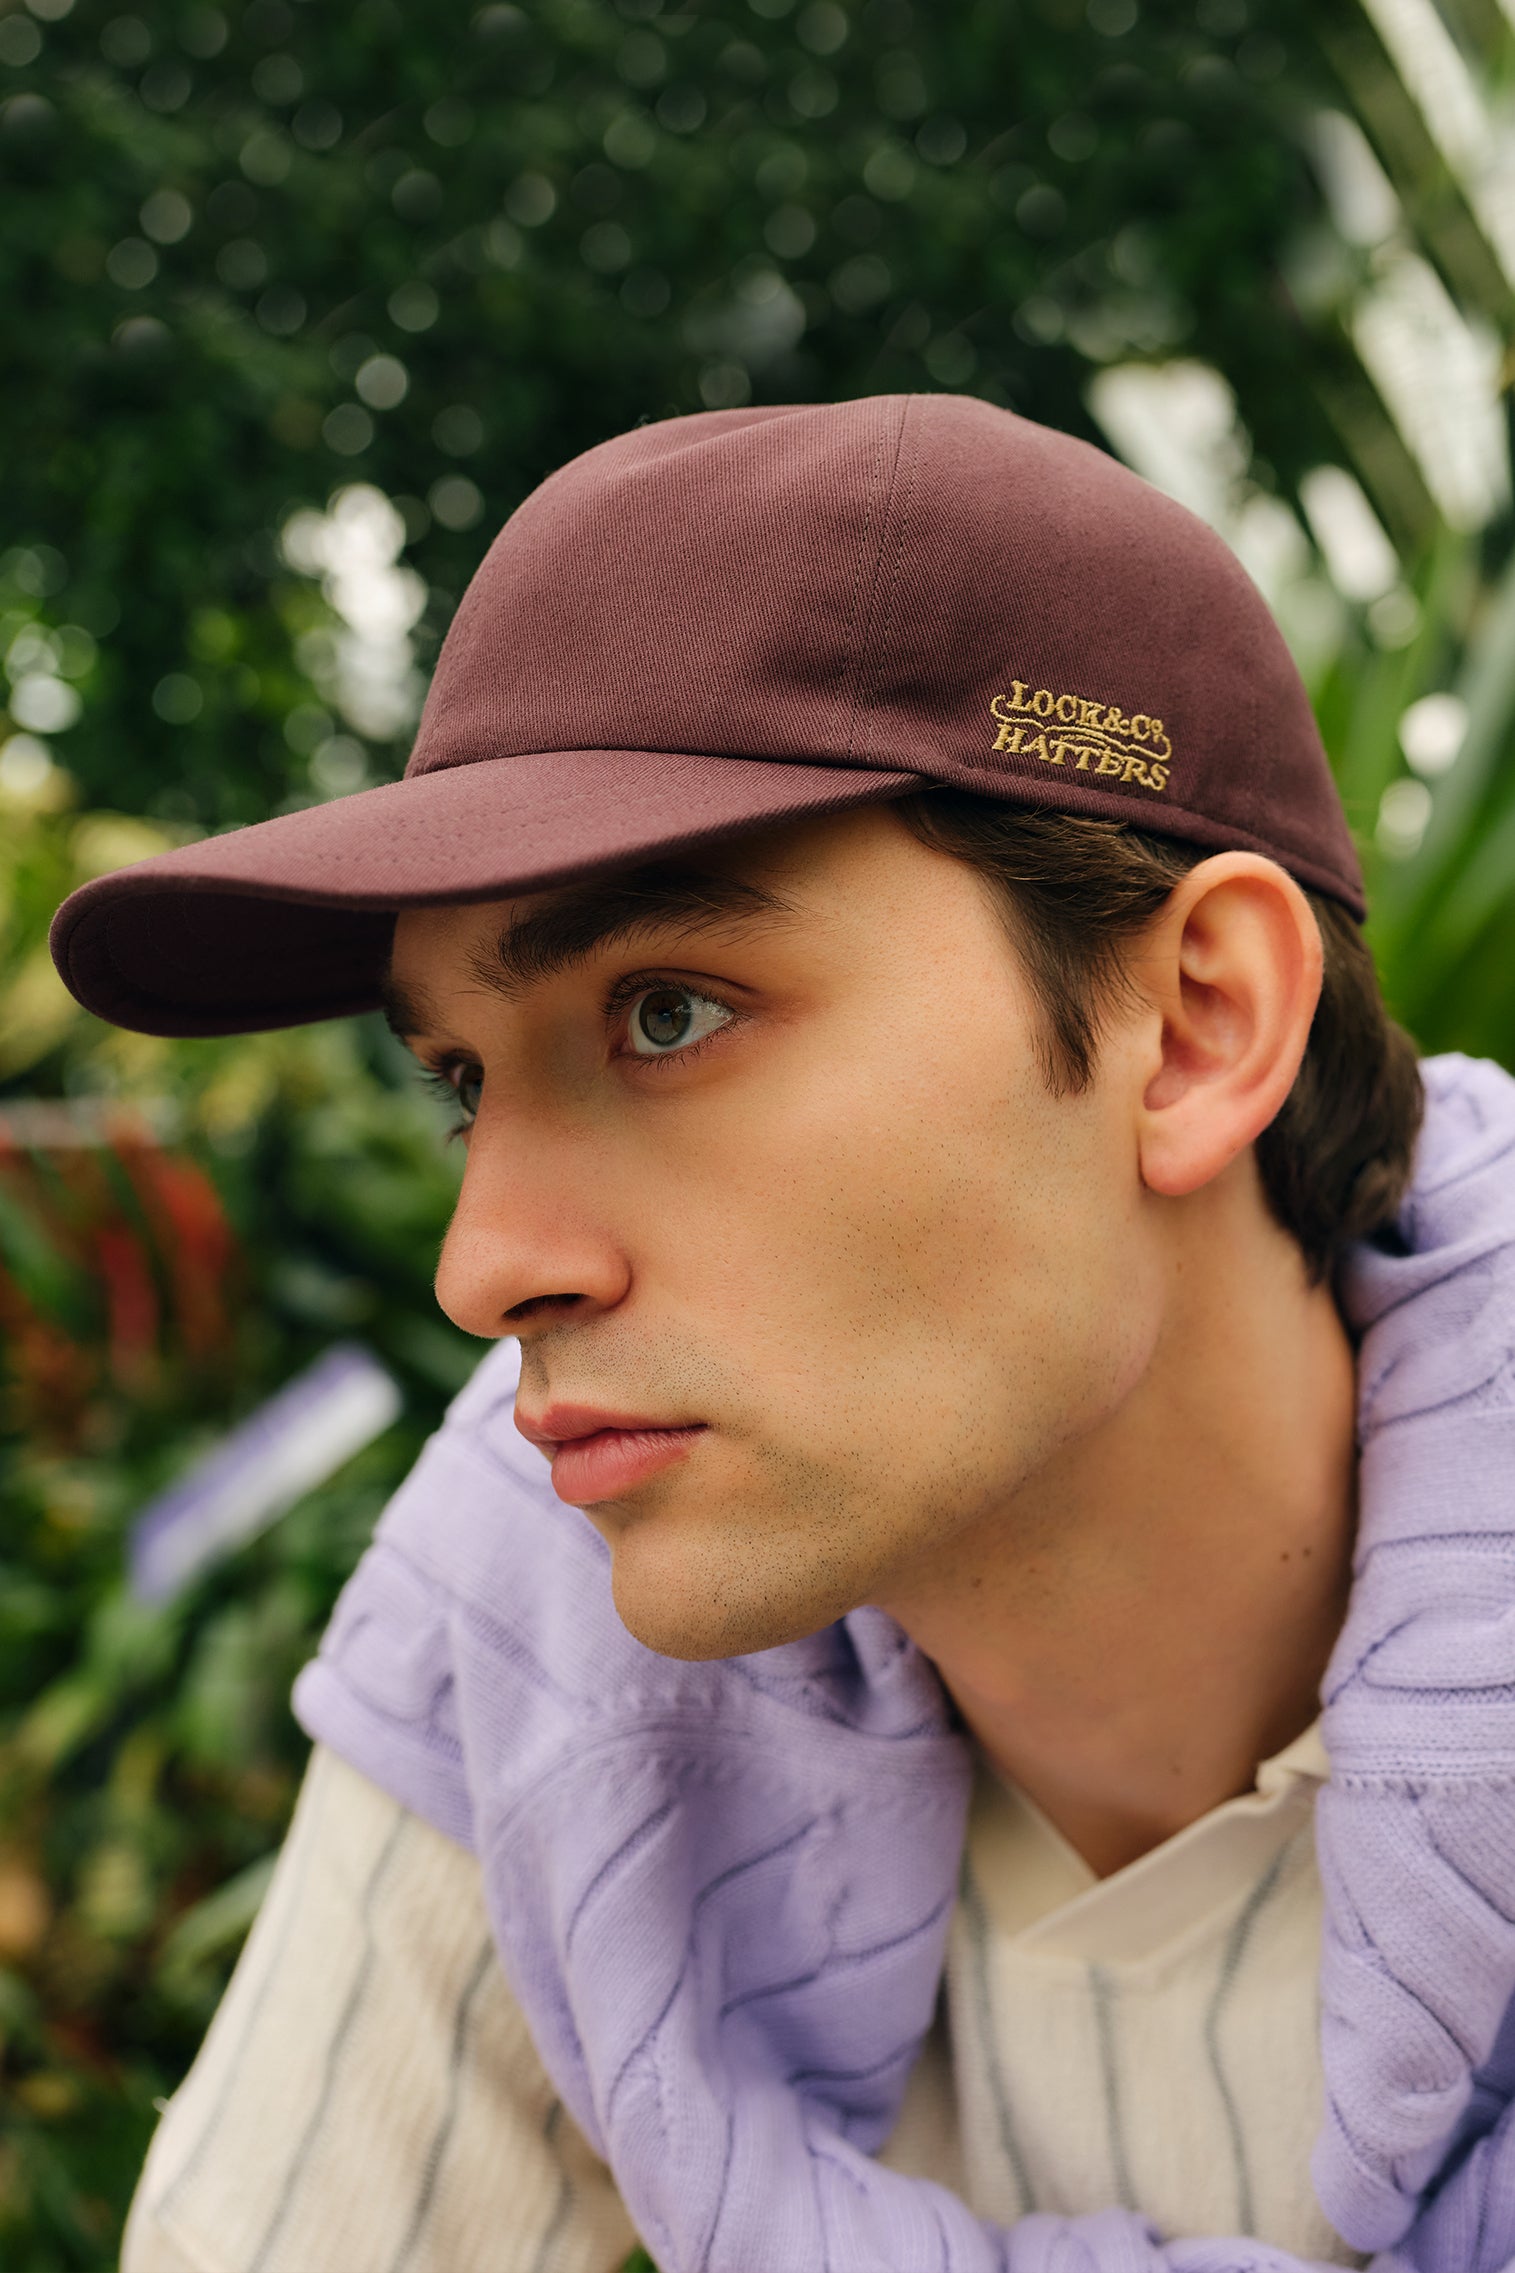 Adjustable Brown Baseball Cap - Hats for Tall People - Lock & Co. Hatters London UK